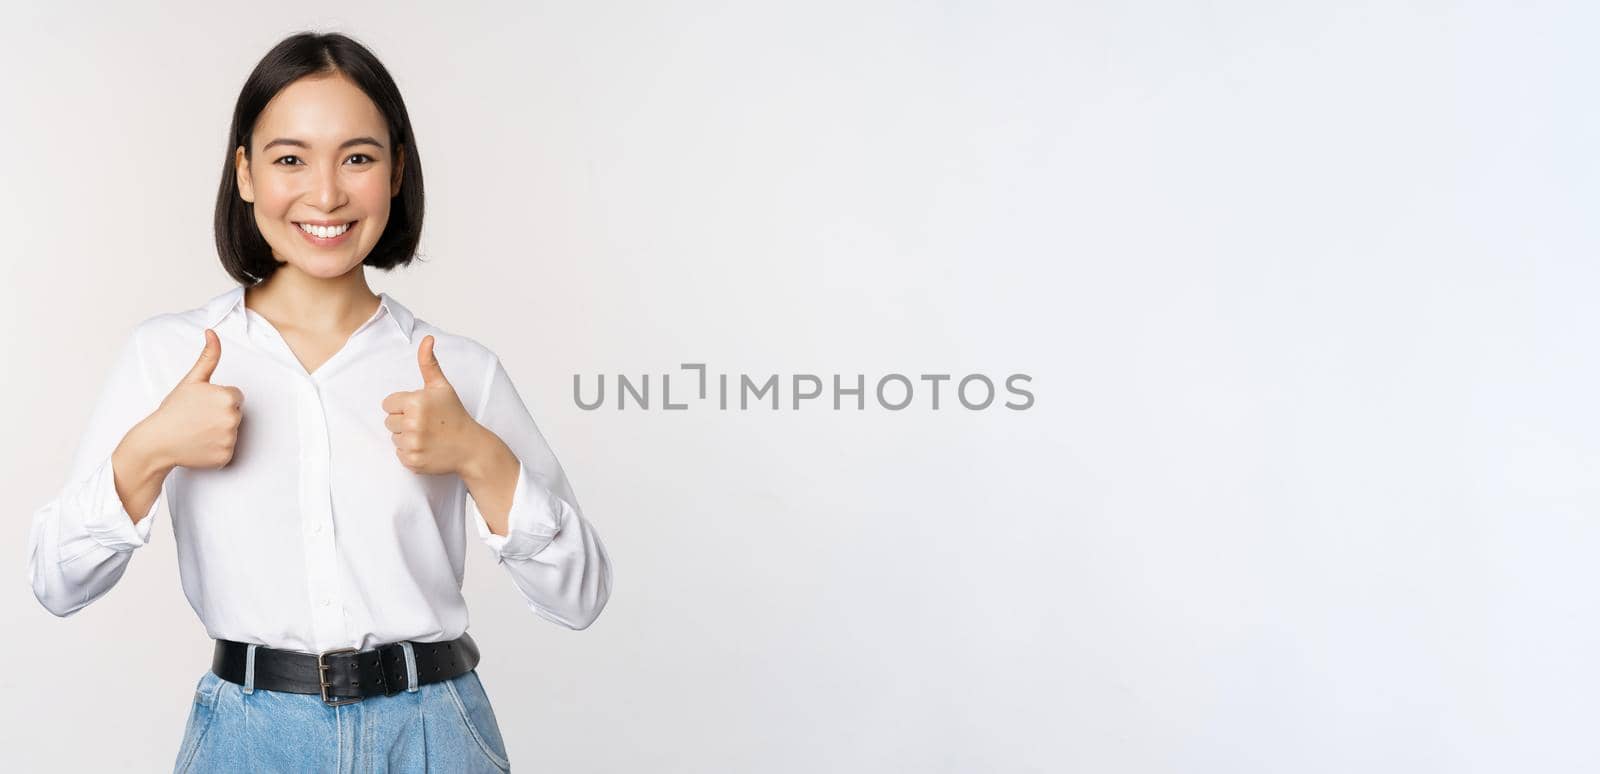 Image of beautiful adult asian woman showing thumbs up, wearing formal office, university clothing, recommending company, standing over white background.